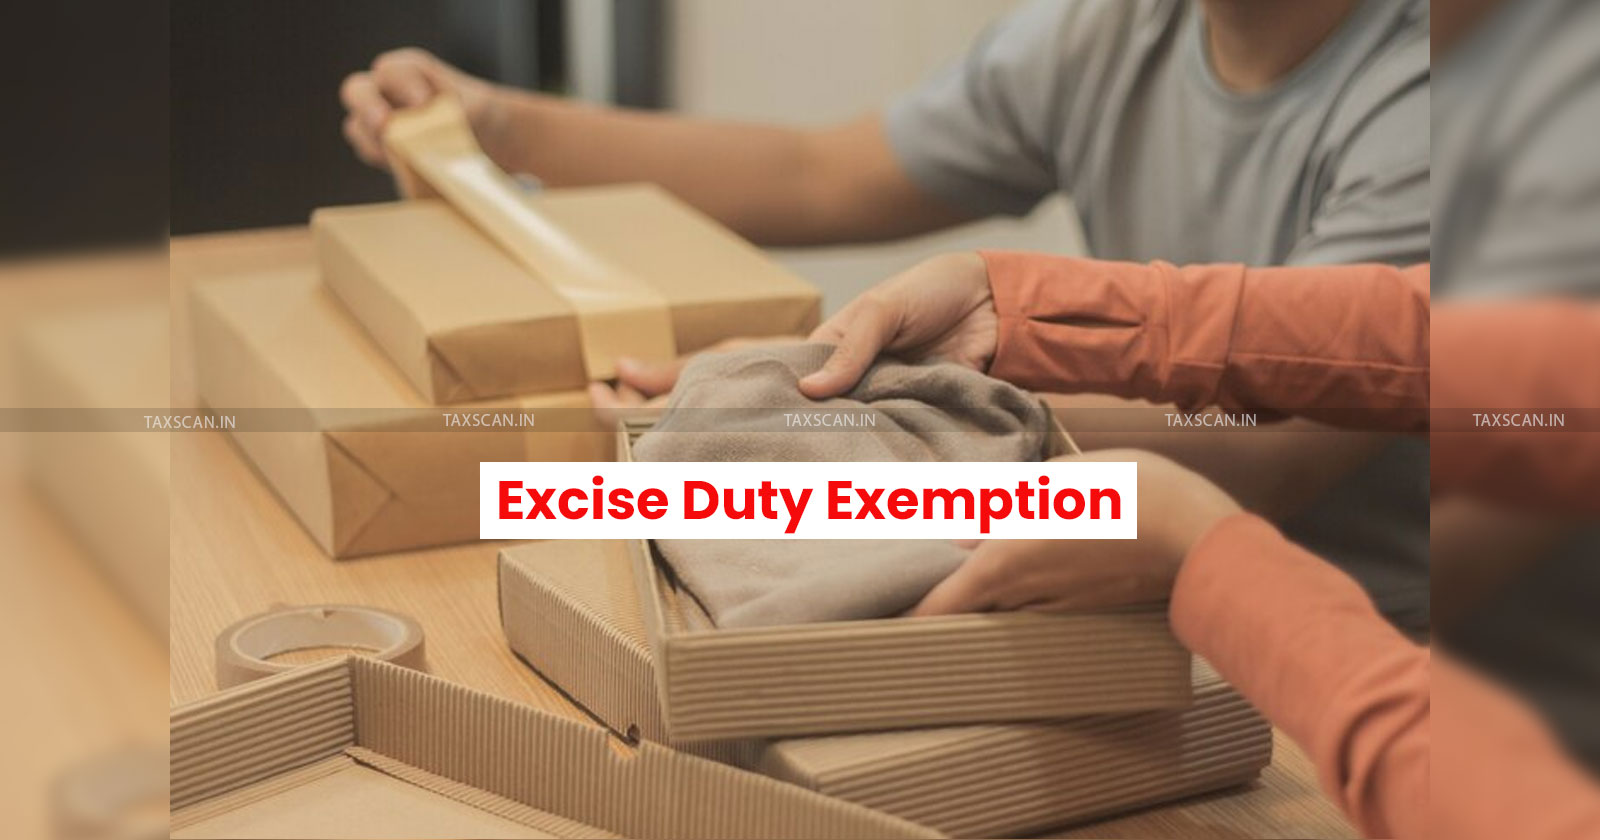 Excise Duty Exemption - Excise Duty - Wilful Suppression - Tax - CESTAT - Excise Duty Exemption cannot be Denied in absence of Wilful Suppression - taxscan